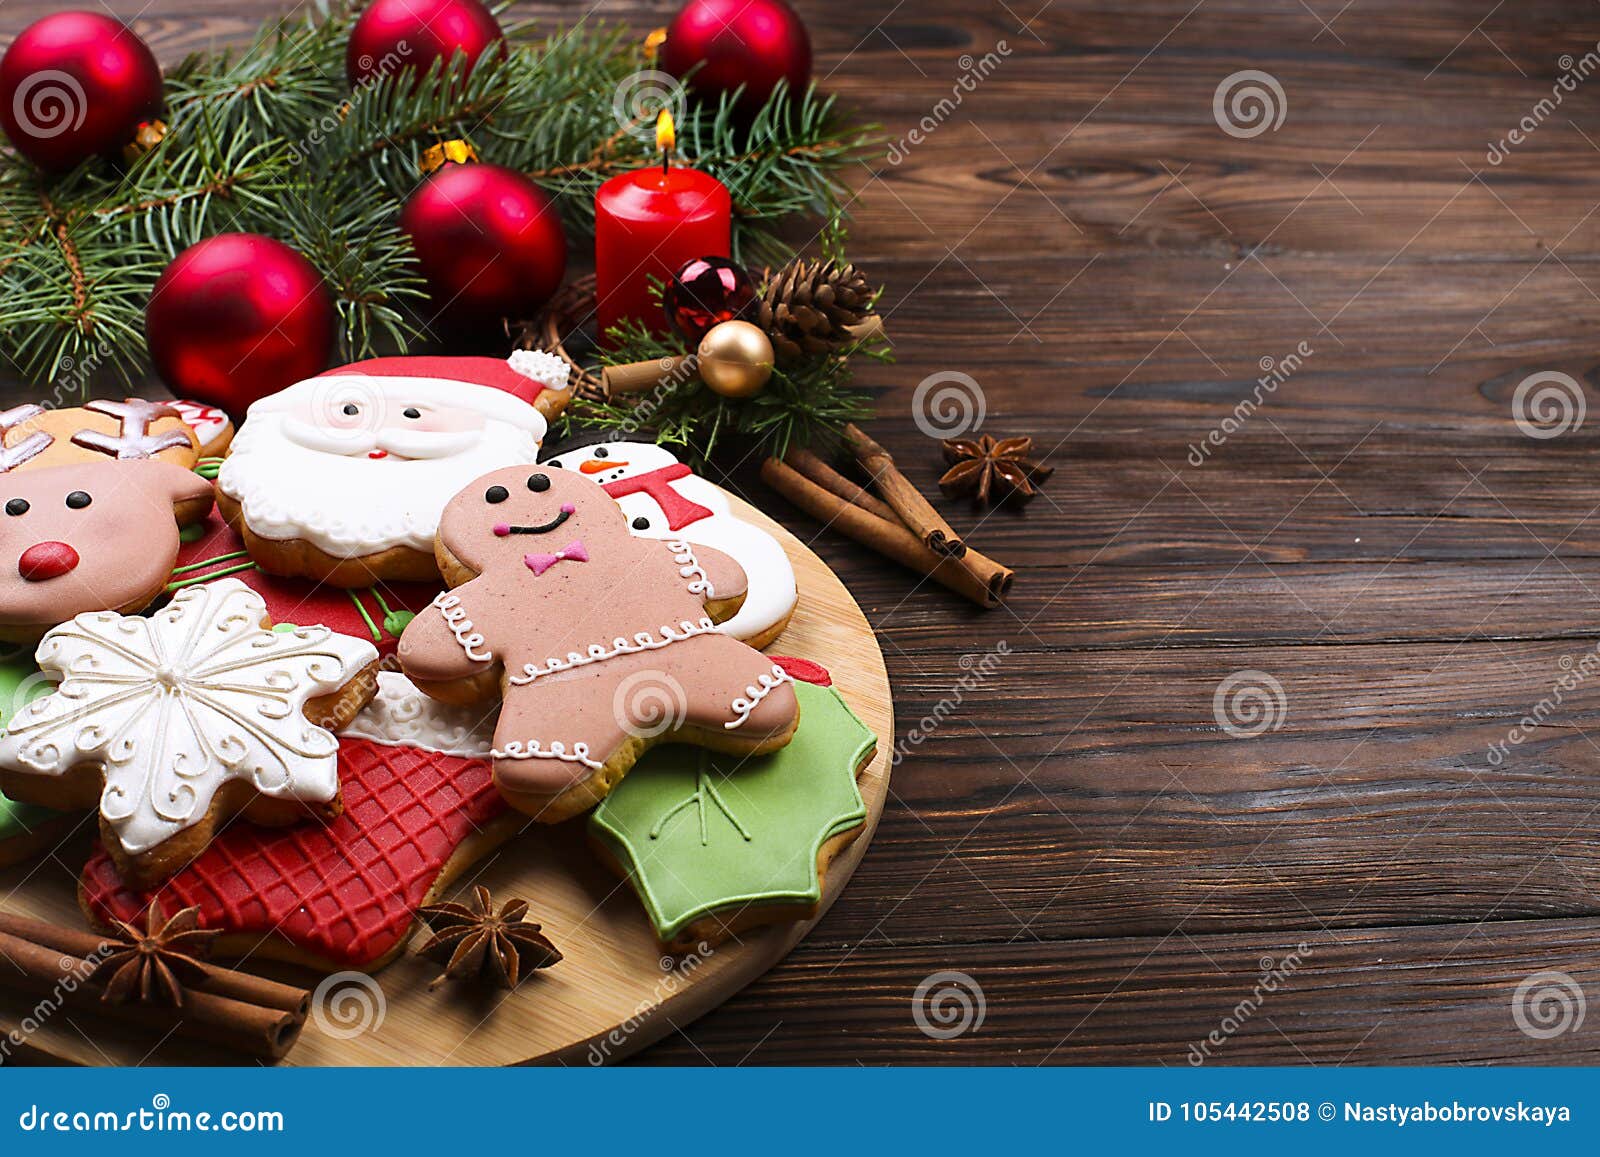 Various Types Of Christmas Gingerbread Cookies With Fir Tree Branches, Cinnamon Sticks, Anise ...